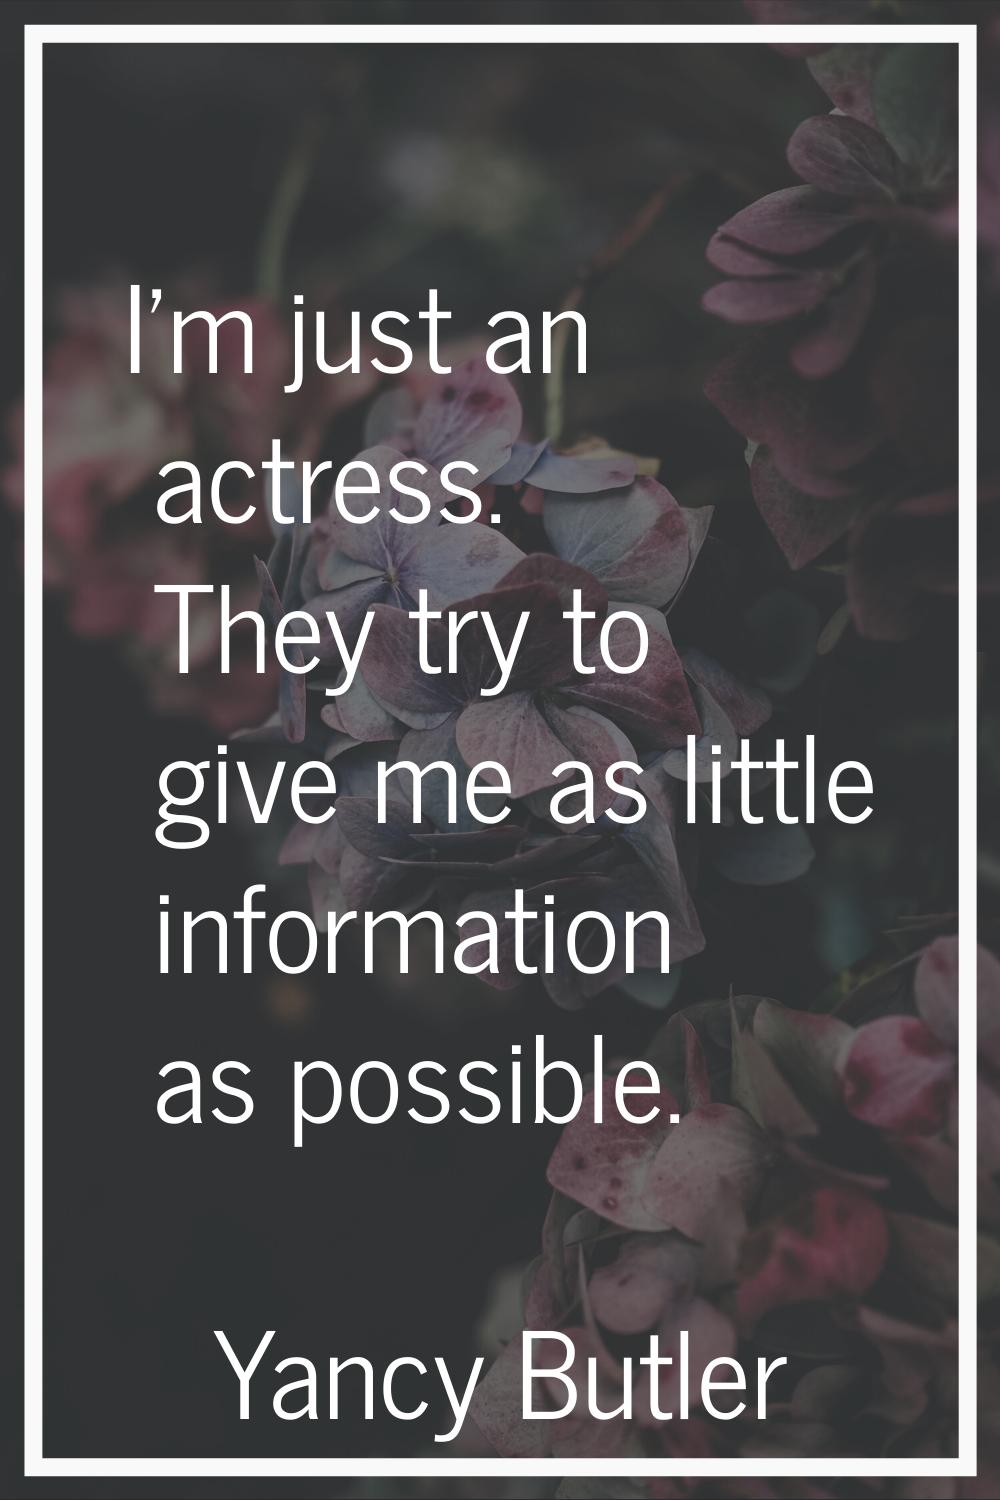 I'm just an actress. They try to give me as little information as possible.